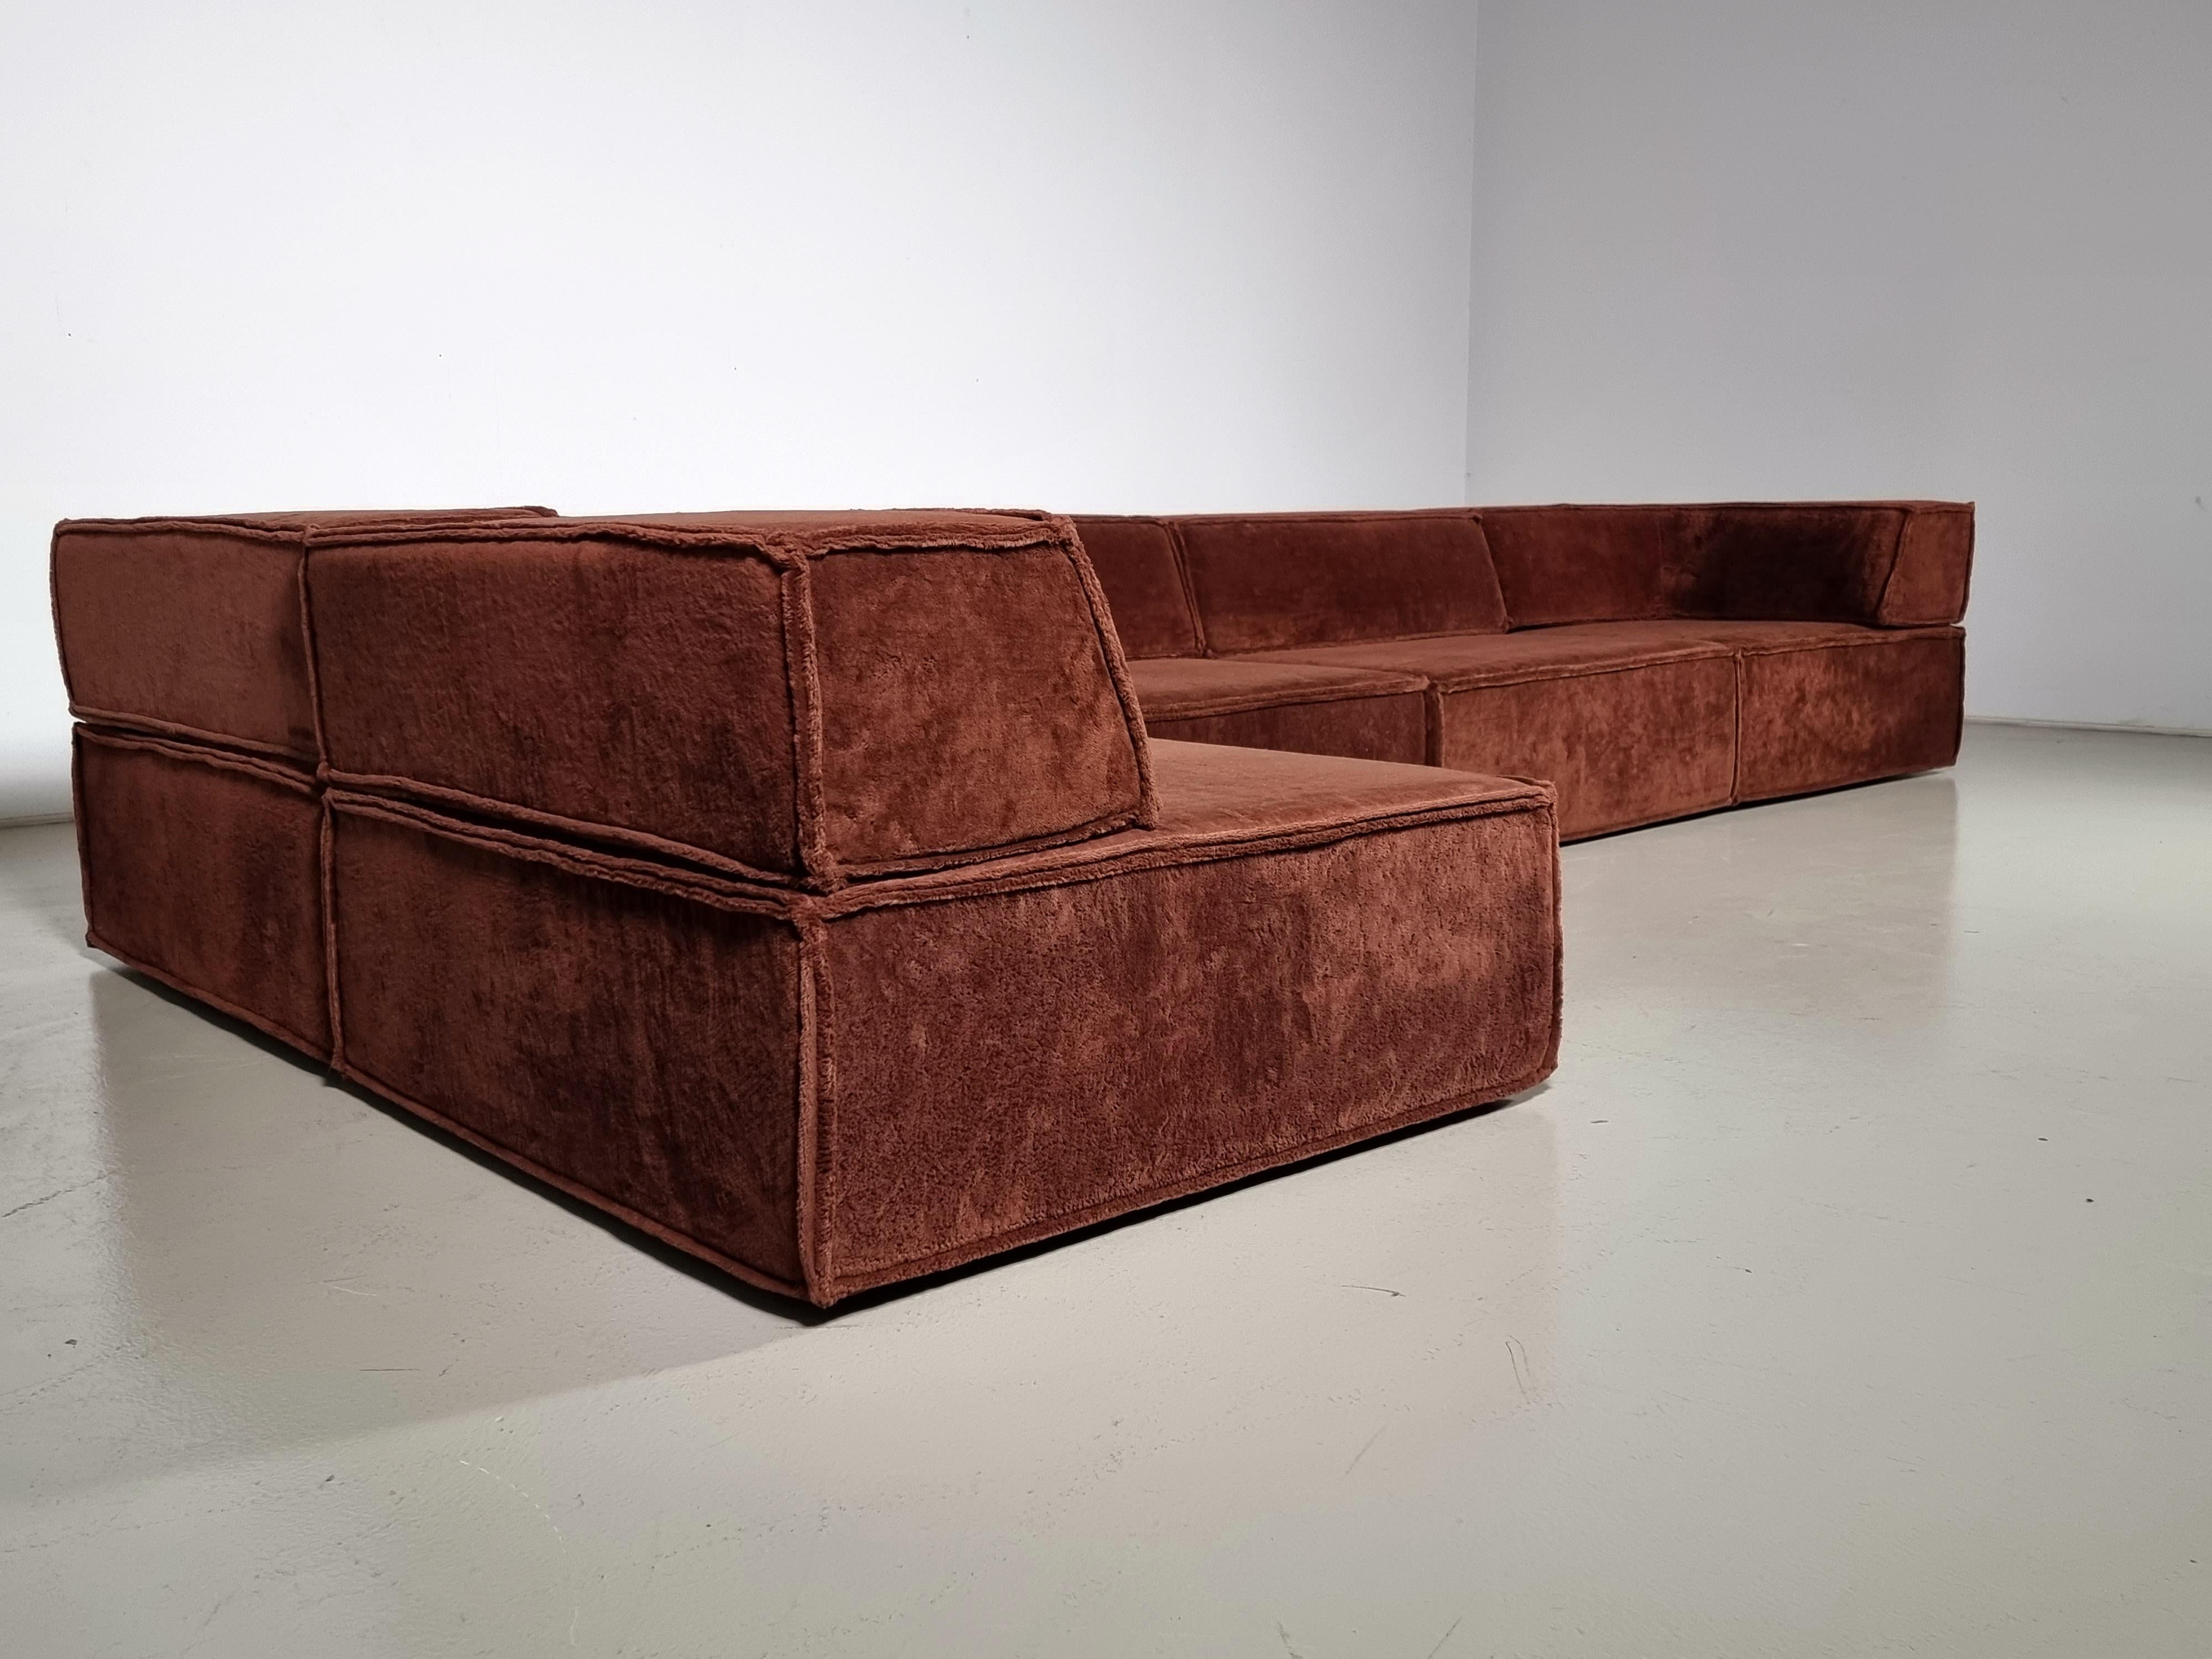 COR Trio Sofa by Team Form Ag in brown original fabric, COR Furniture, Germany 5